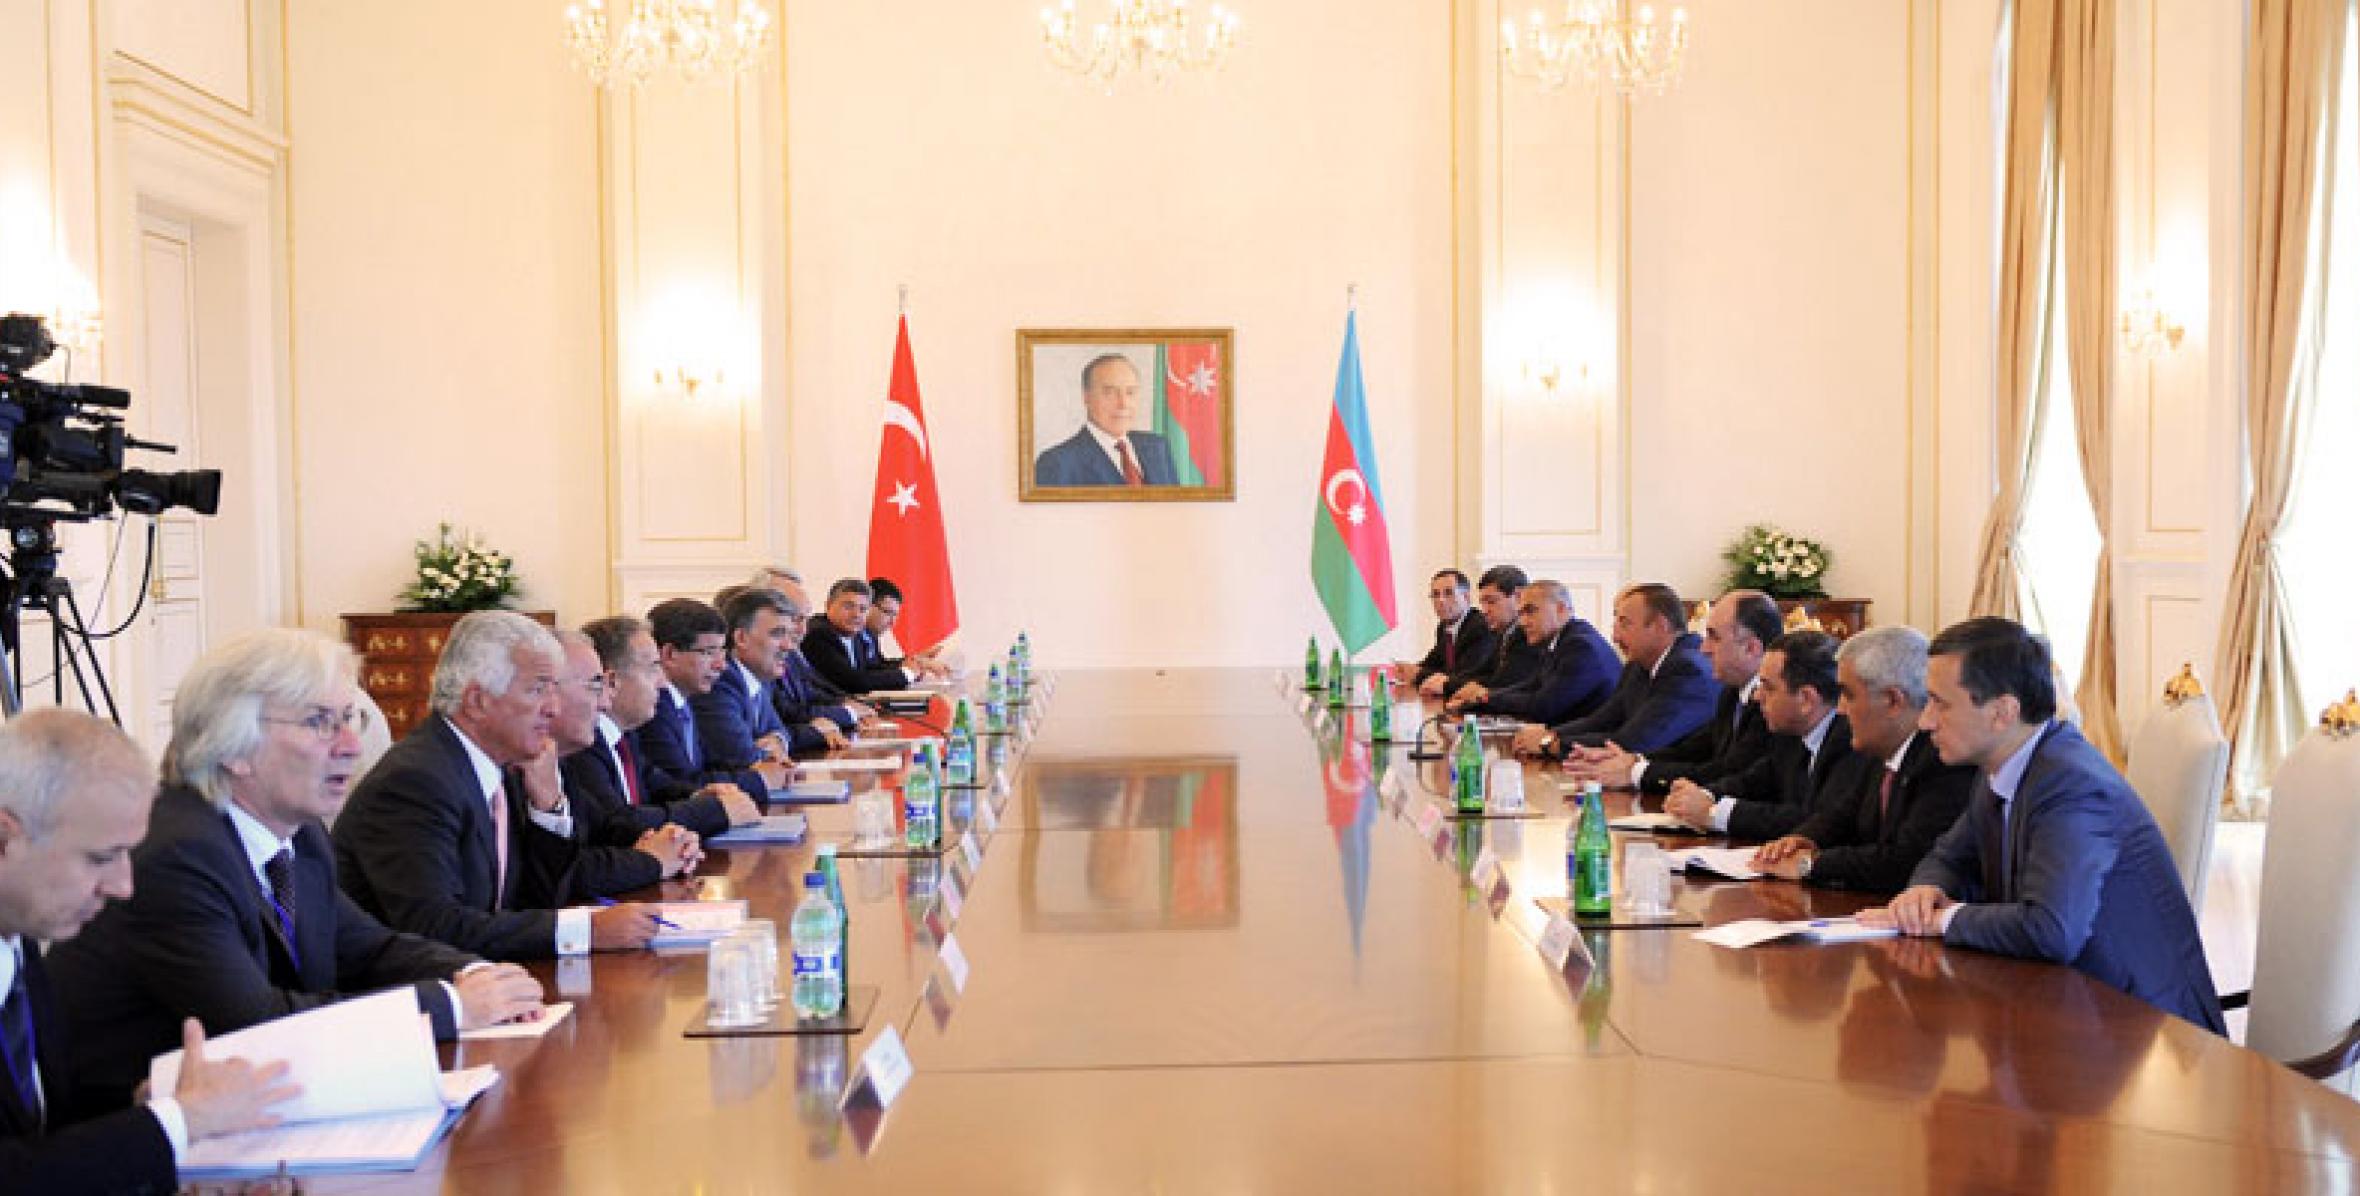 Ilham Aliyev and Abdullah Gul met with the participation of delegations